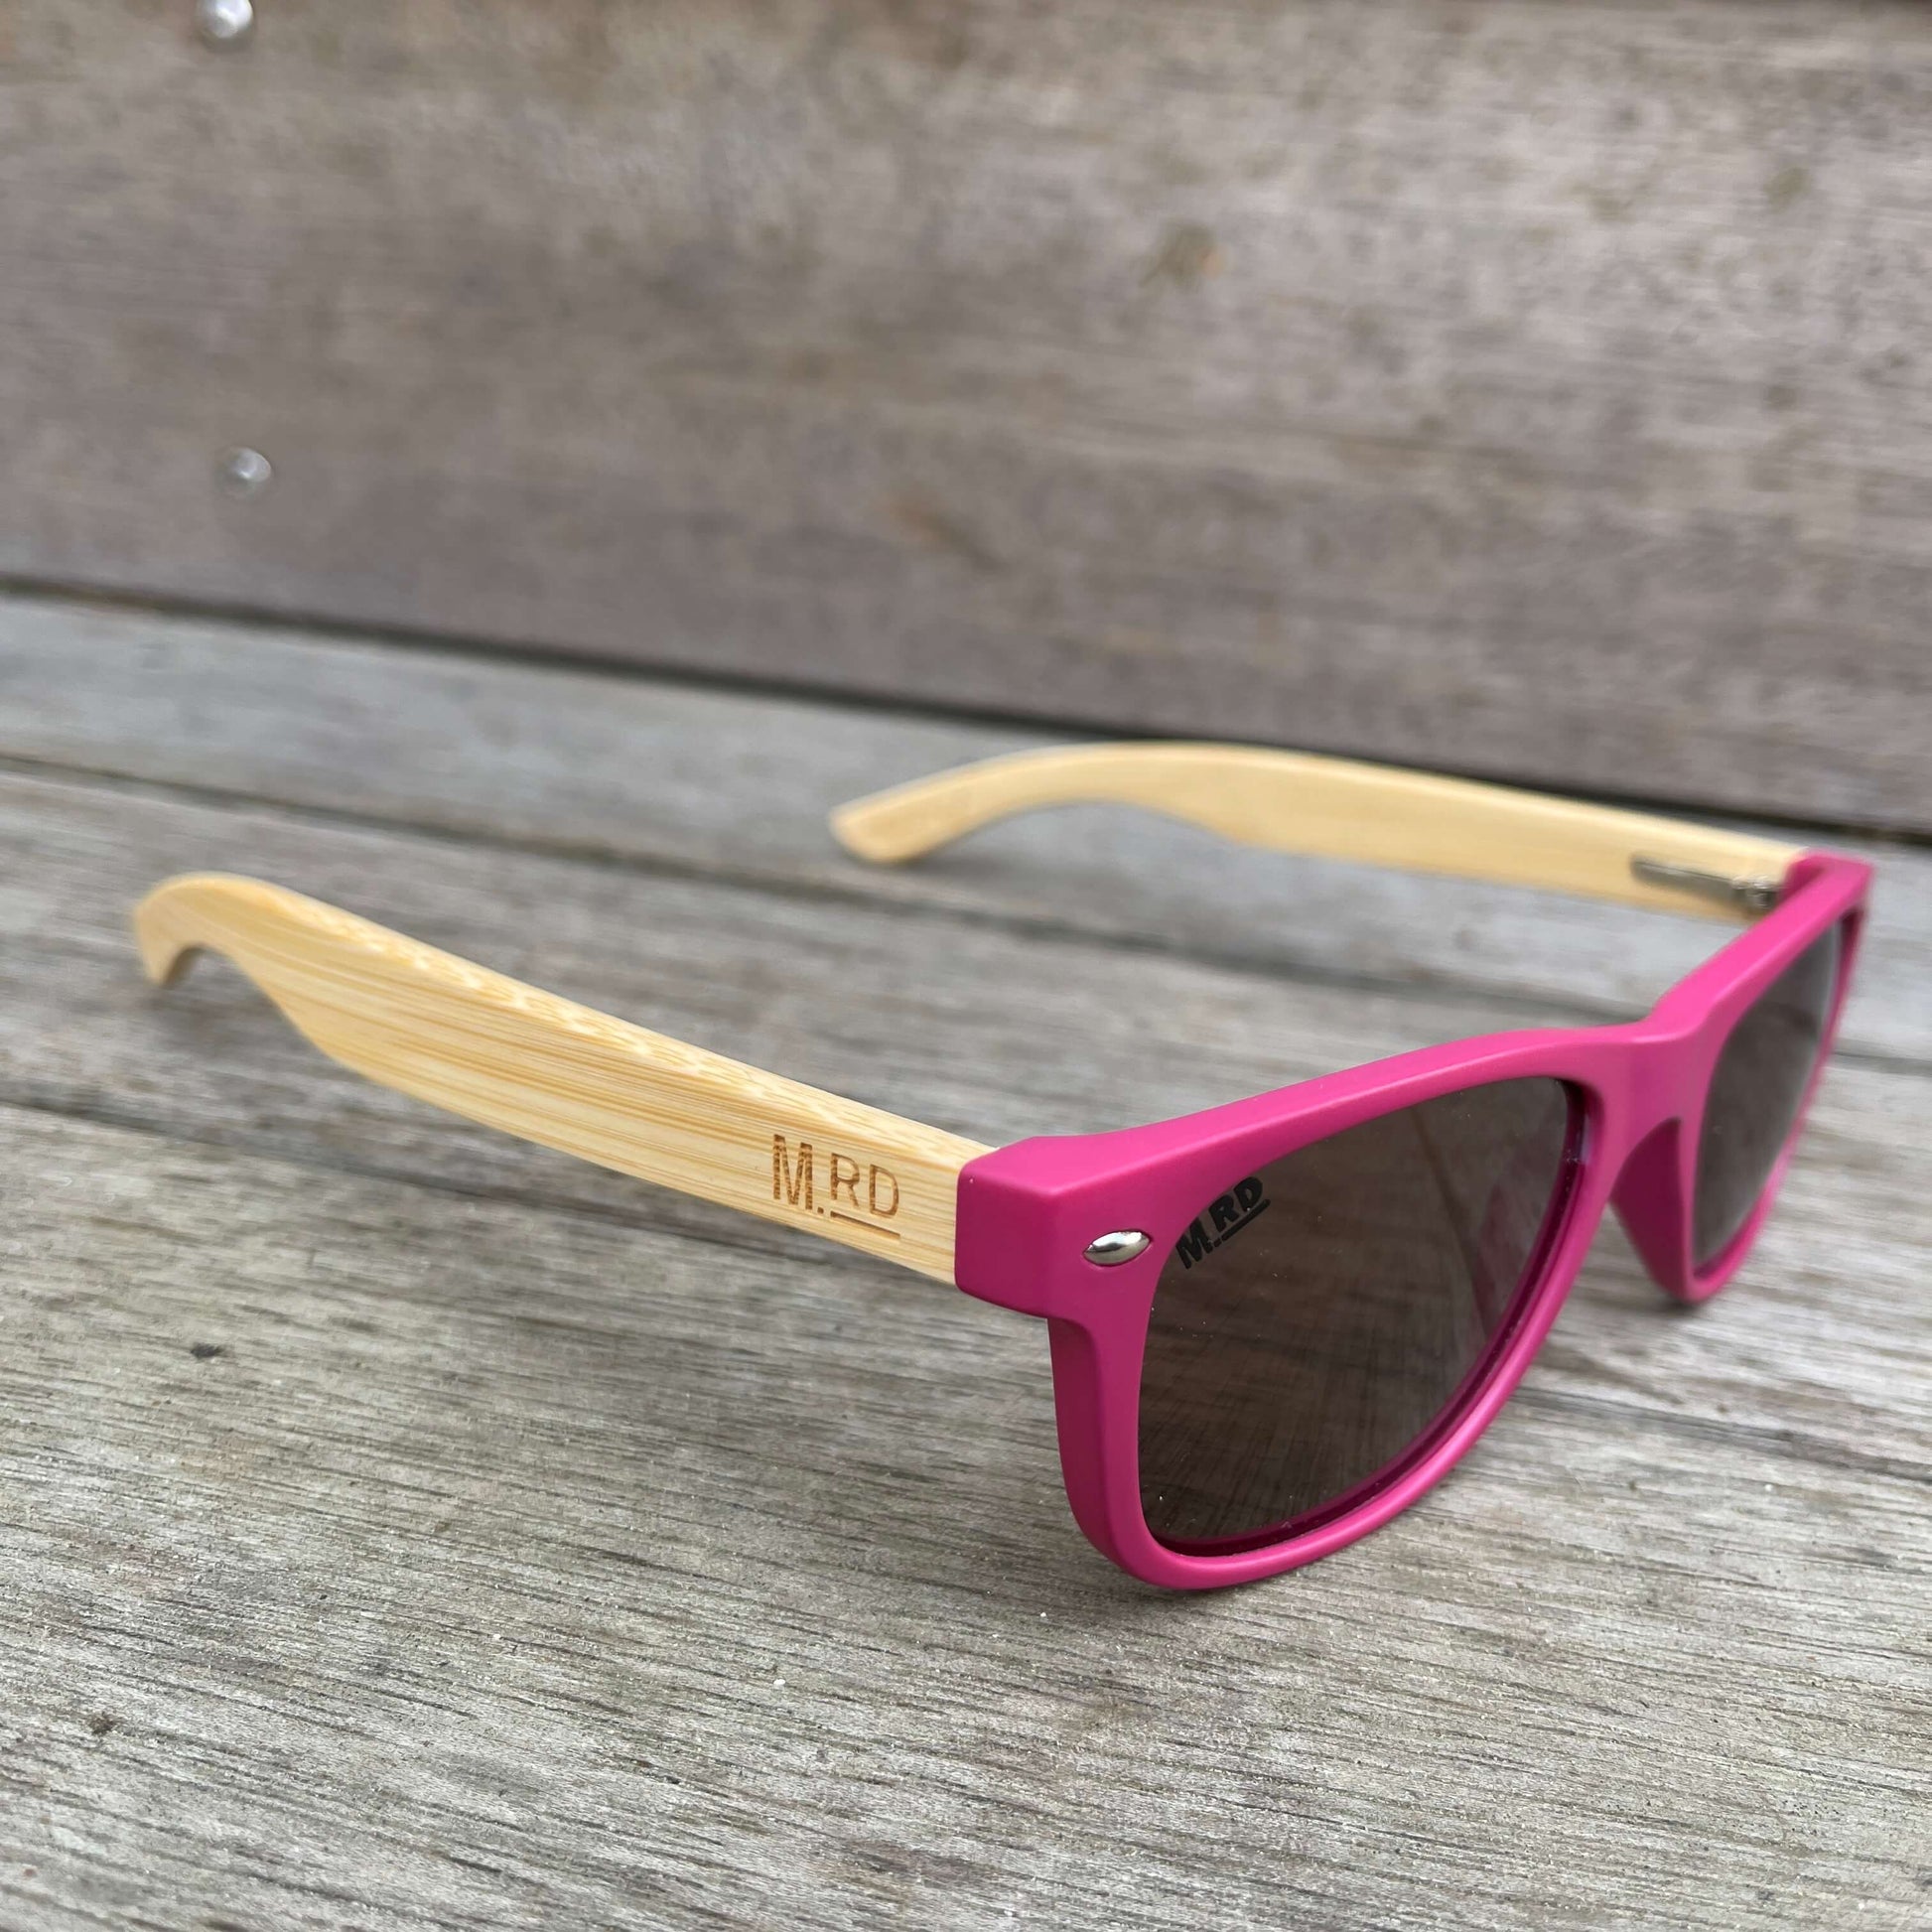 Kids sunglasses with pink frame and wooden arms.